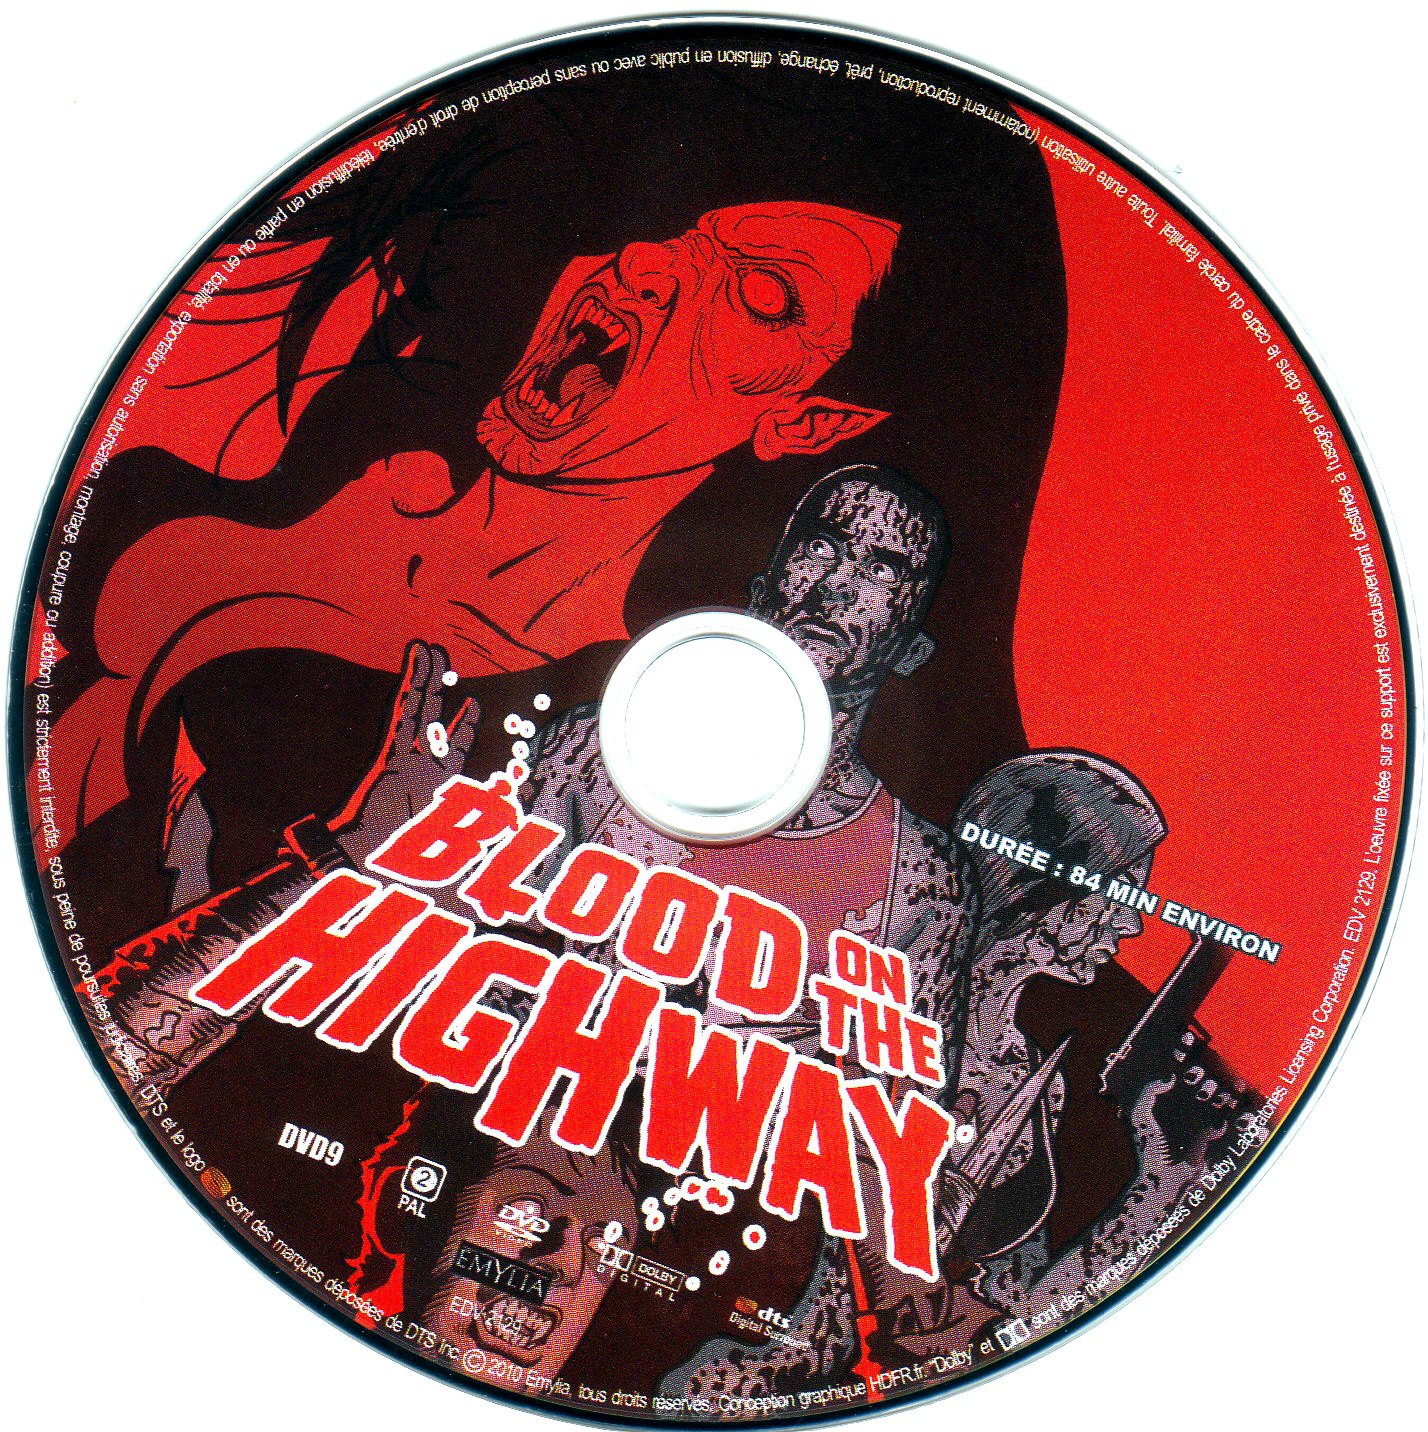 Blood on the Highway